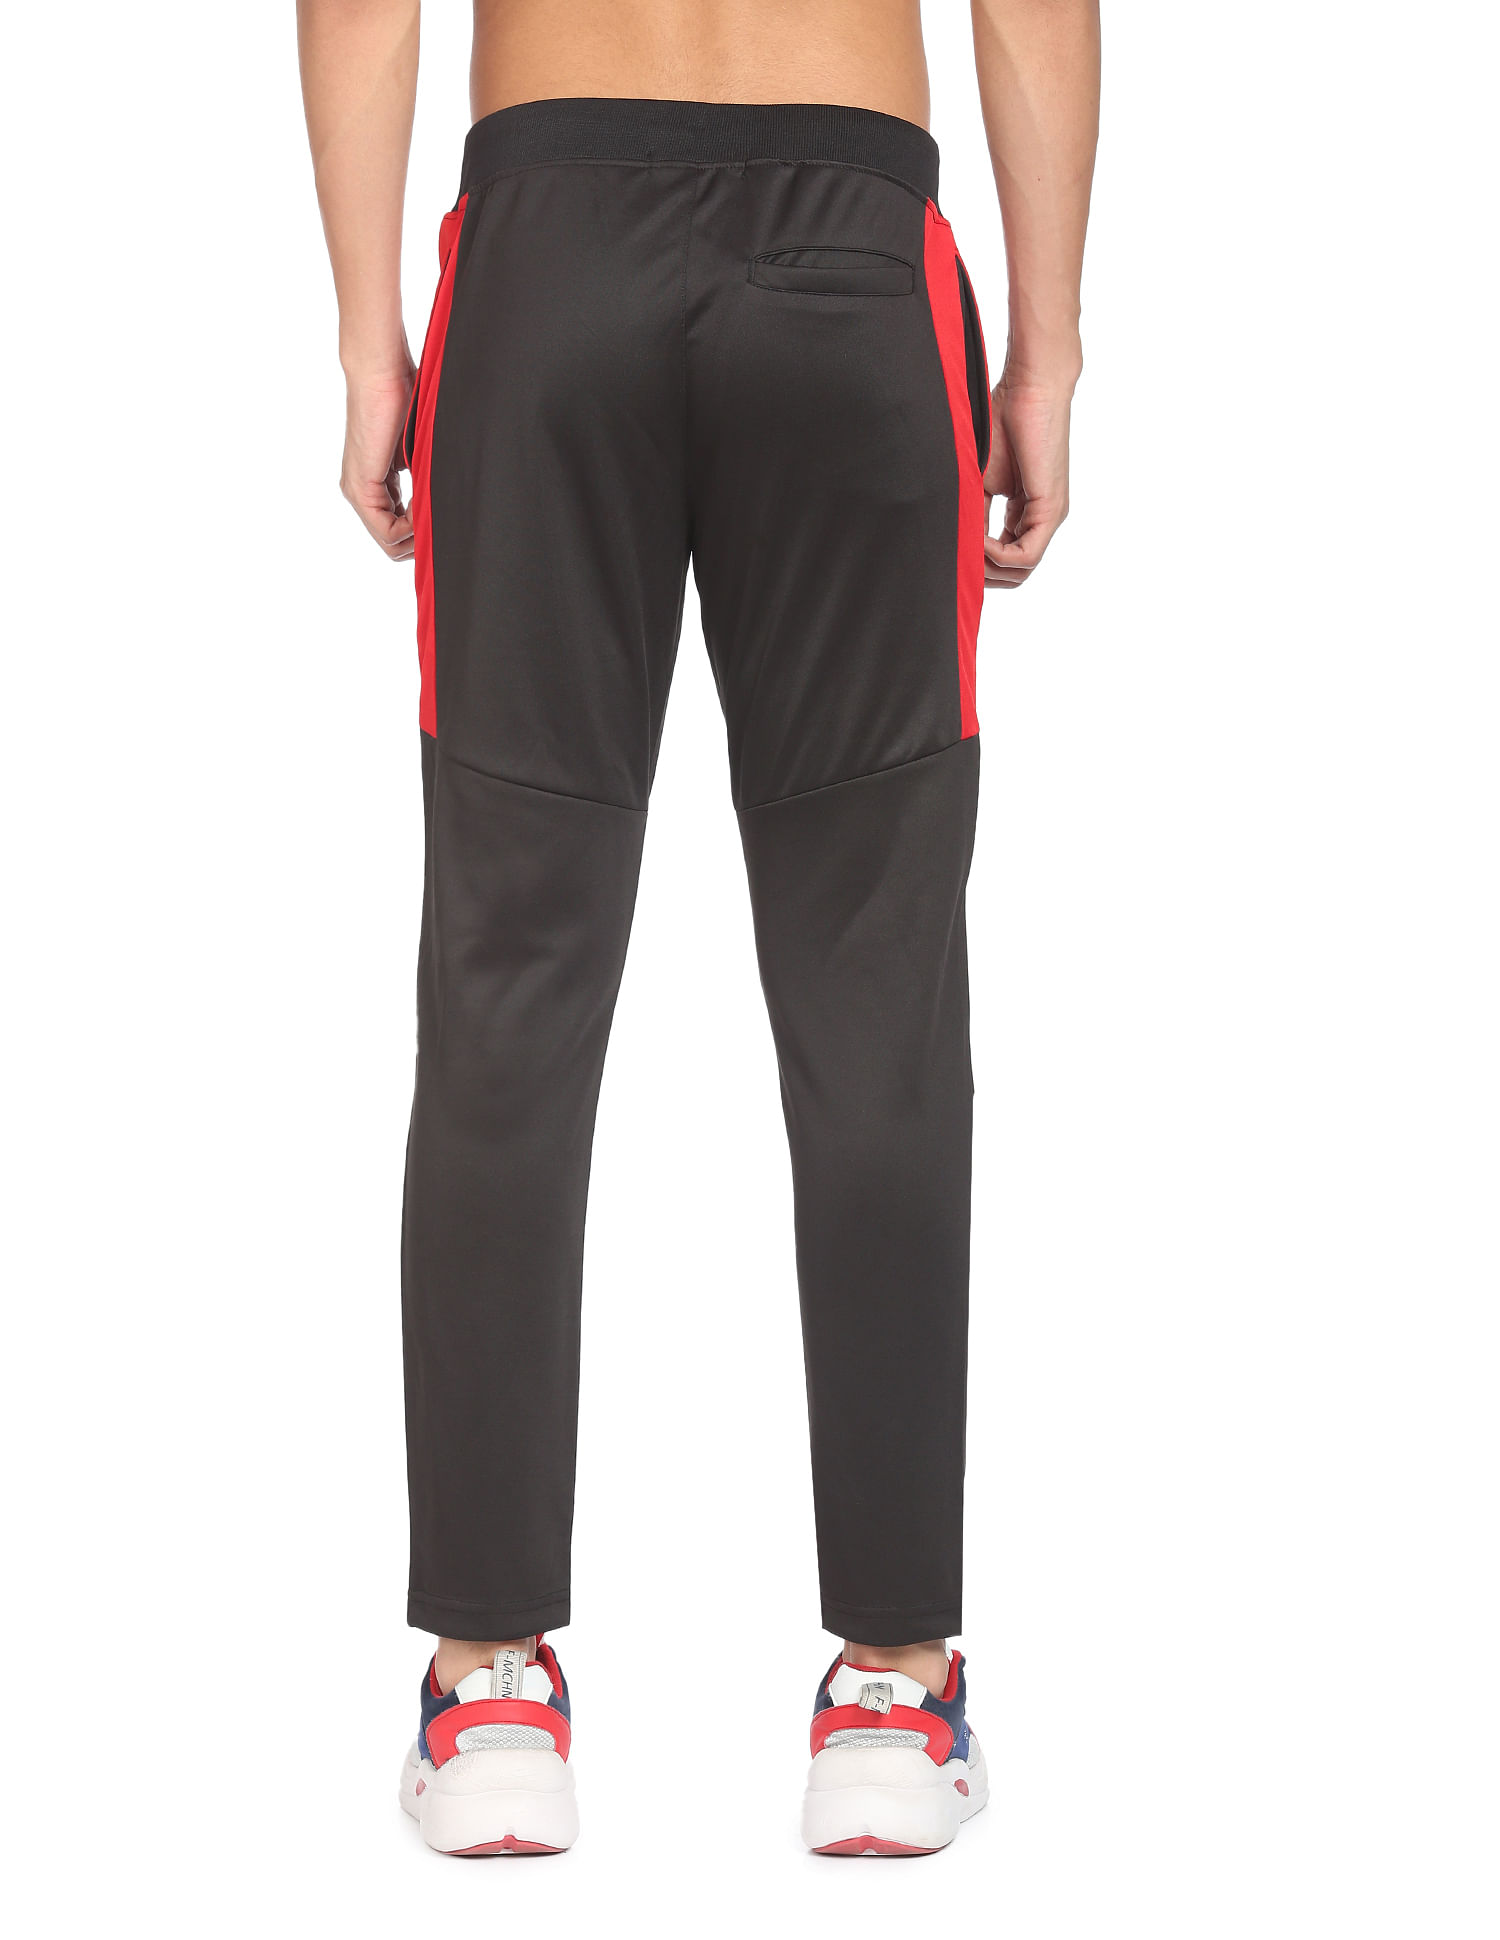 Masch Sports Mens Regular Fit Polyester Track Pants MSTP 1218 CS SP2PIP  GBNEON Grey Small online in India  Healthkartcom